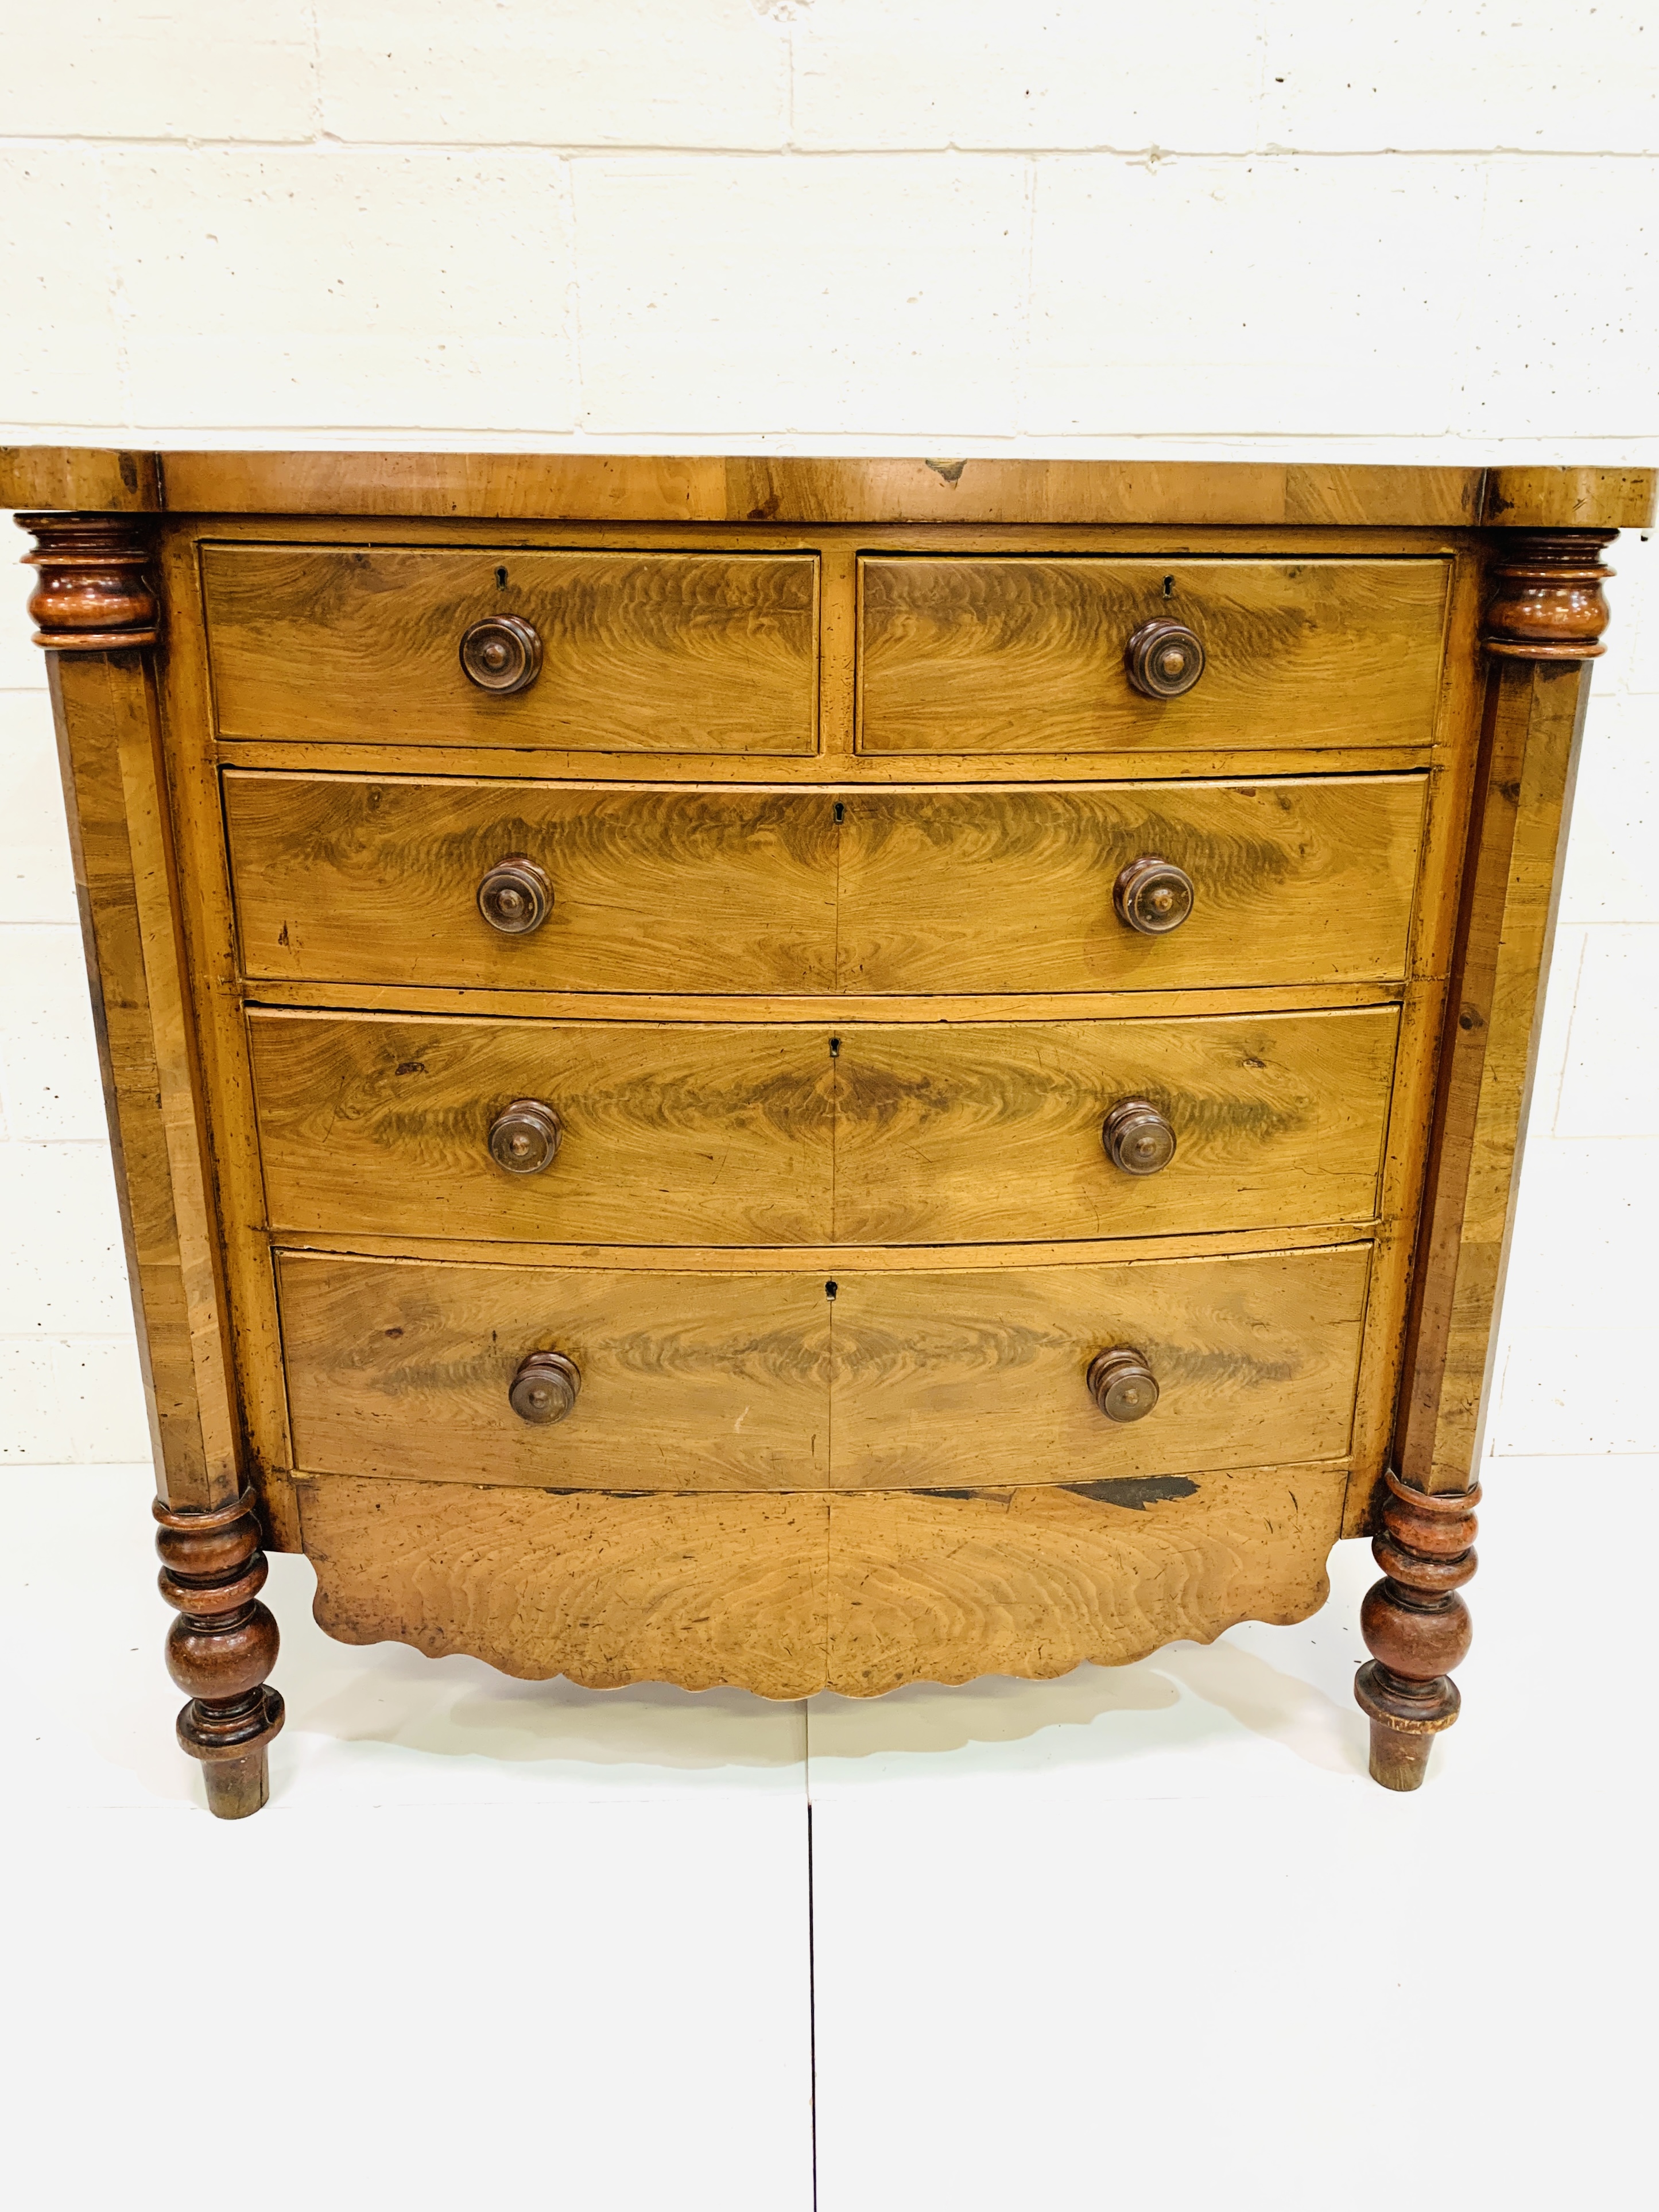 Victorian mahogany veneer Scotch chest of drawers - Image 8 of 8